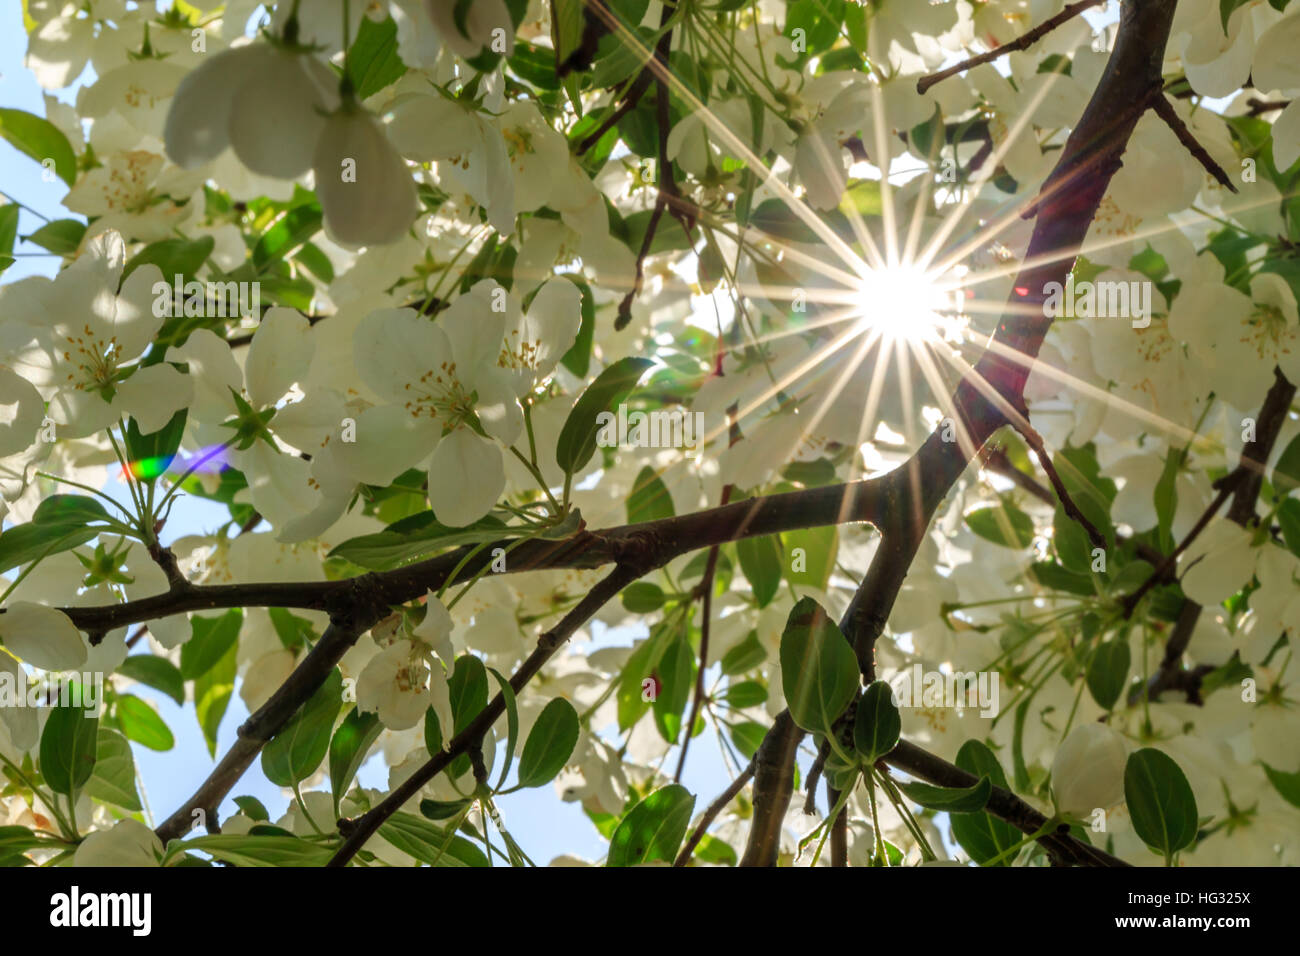 White apple flowering tree with sunlight rays coming through. Stock Photo